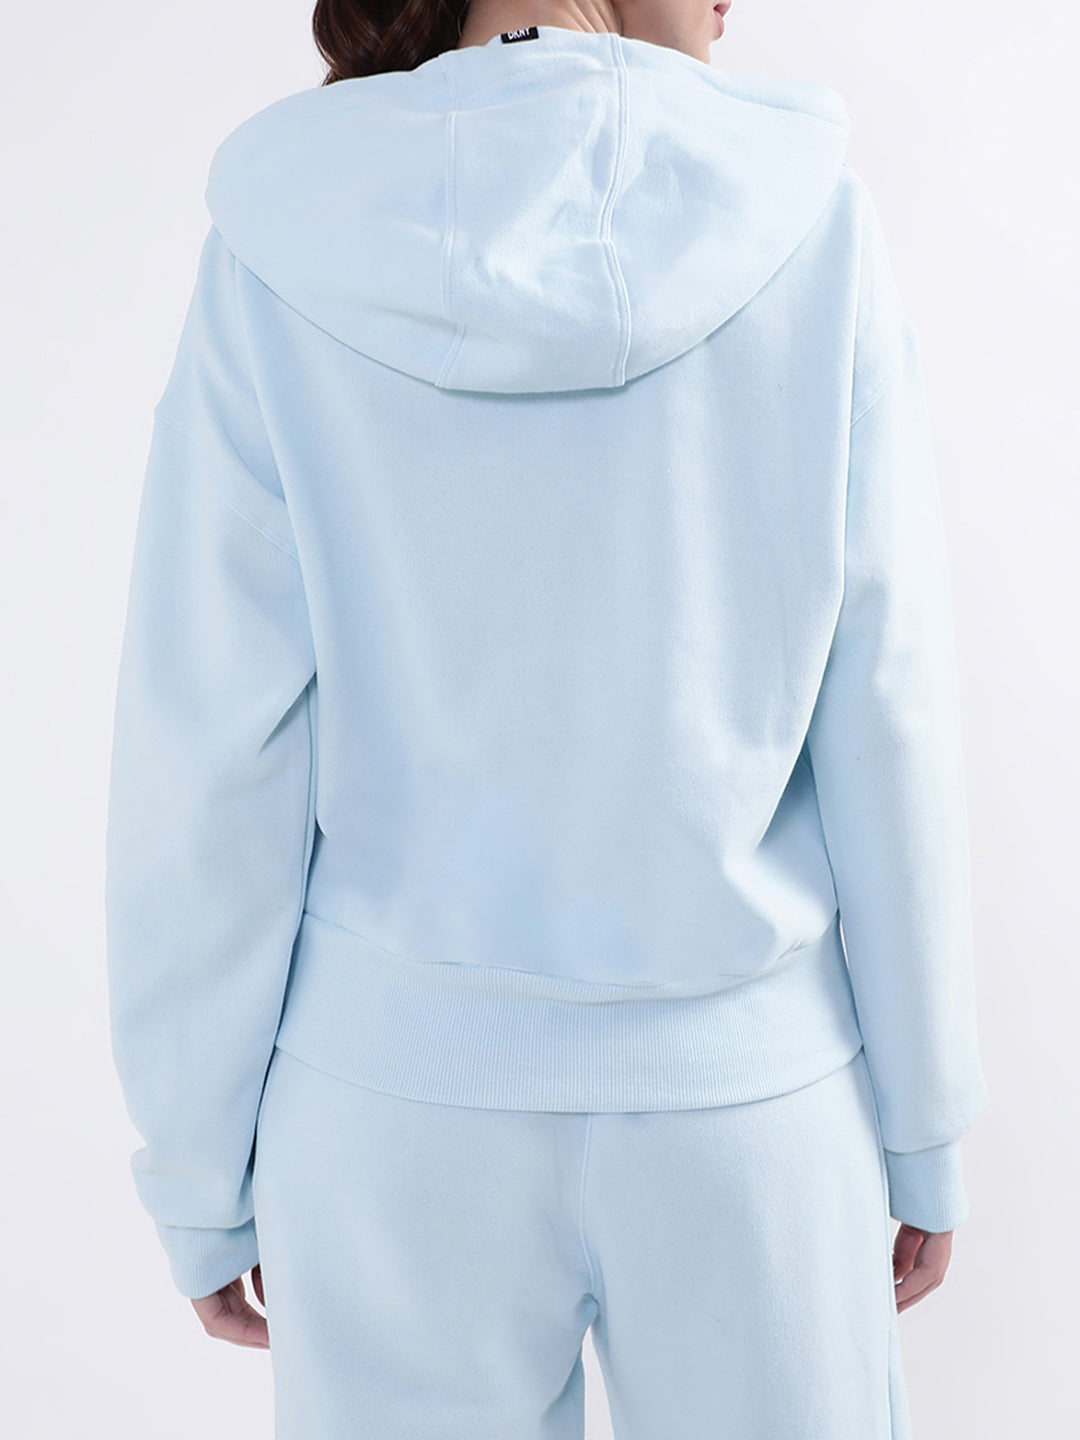 DKNY Activewear Athletic Hoodies for Women